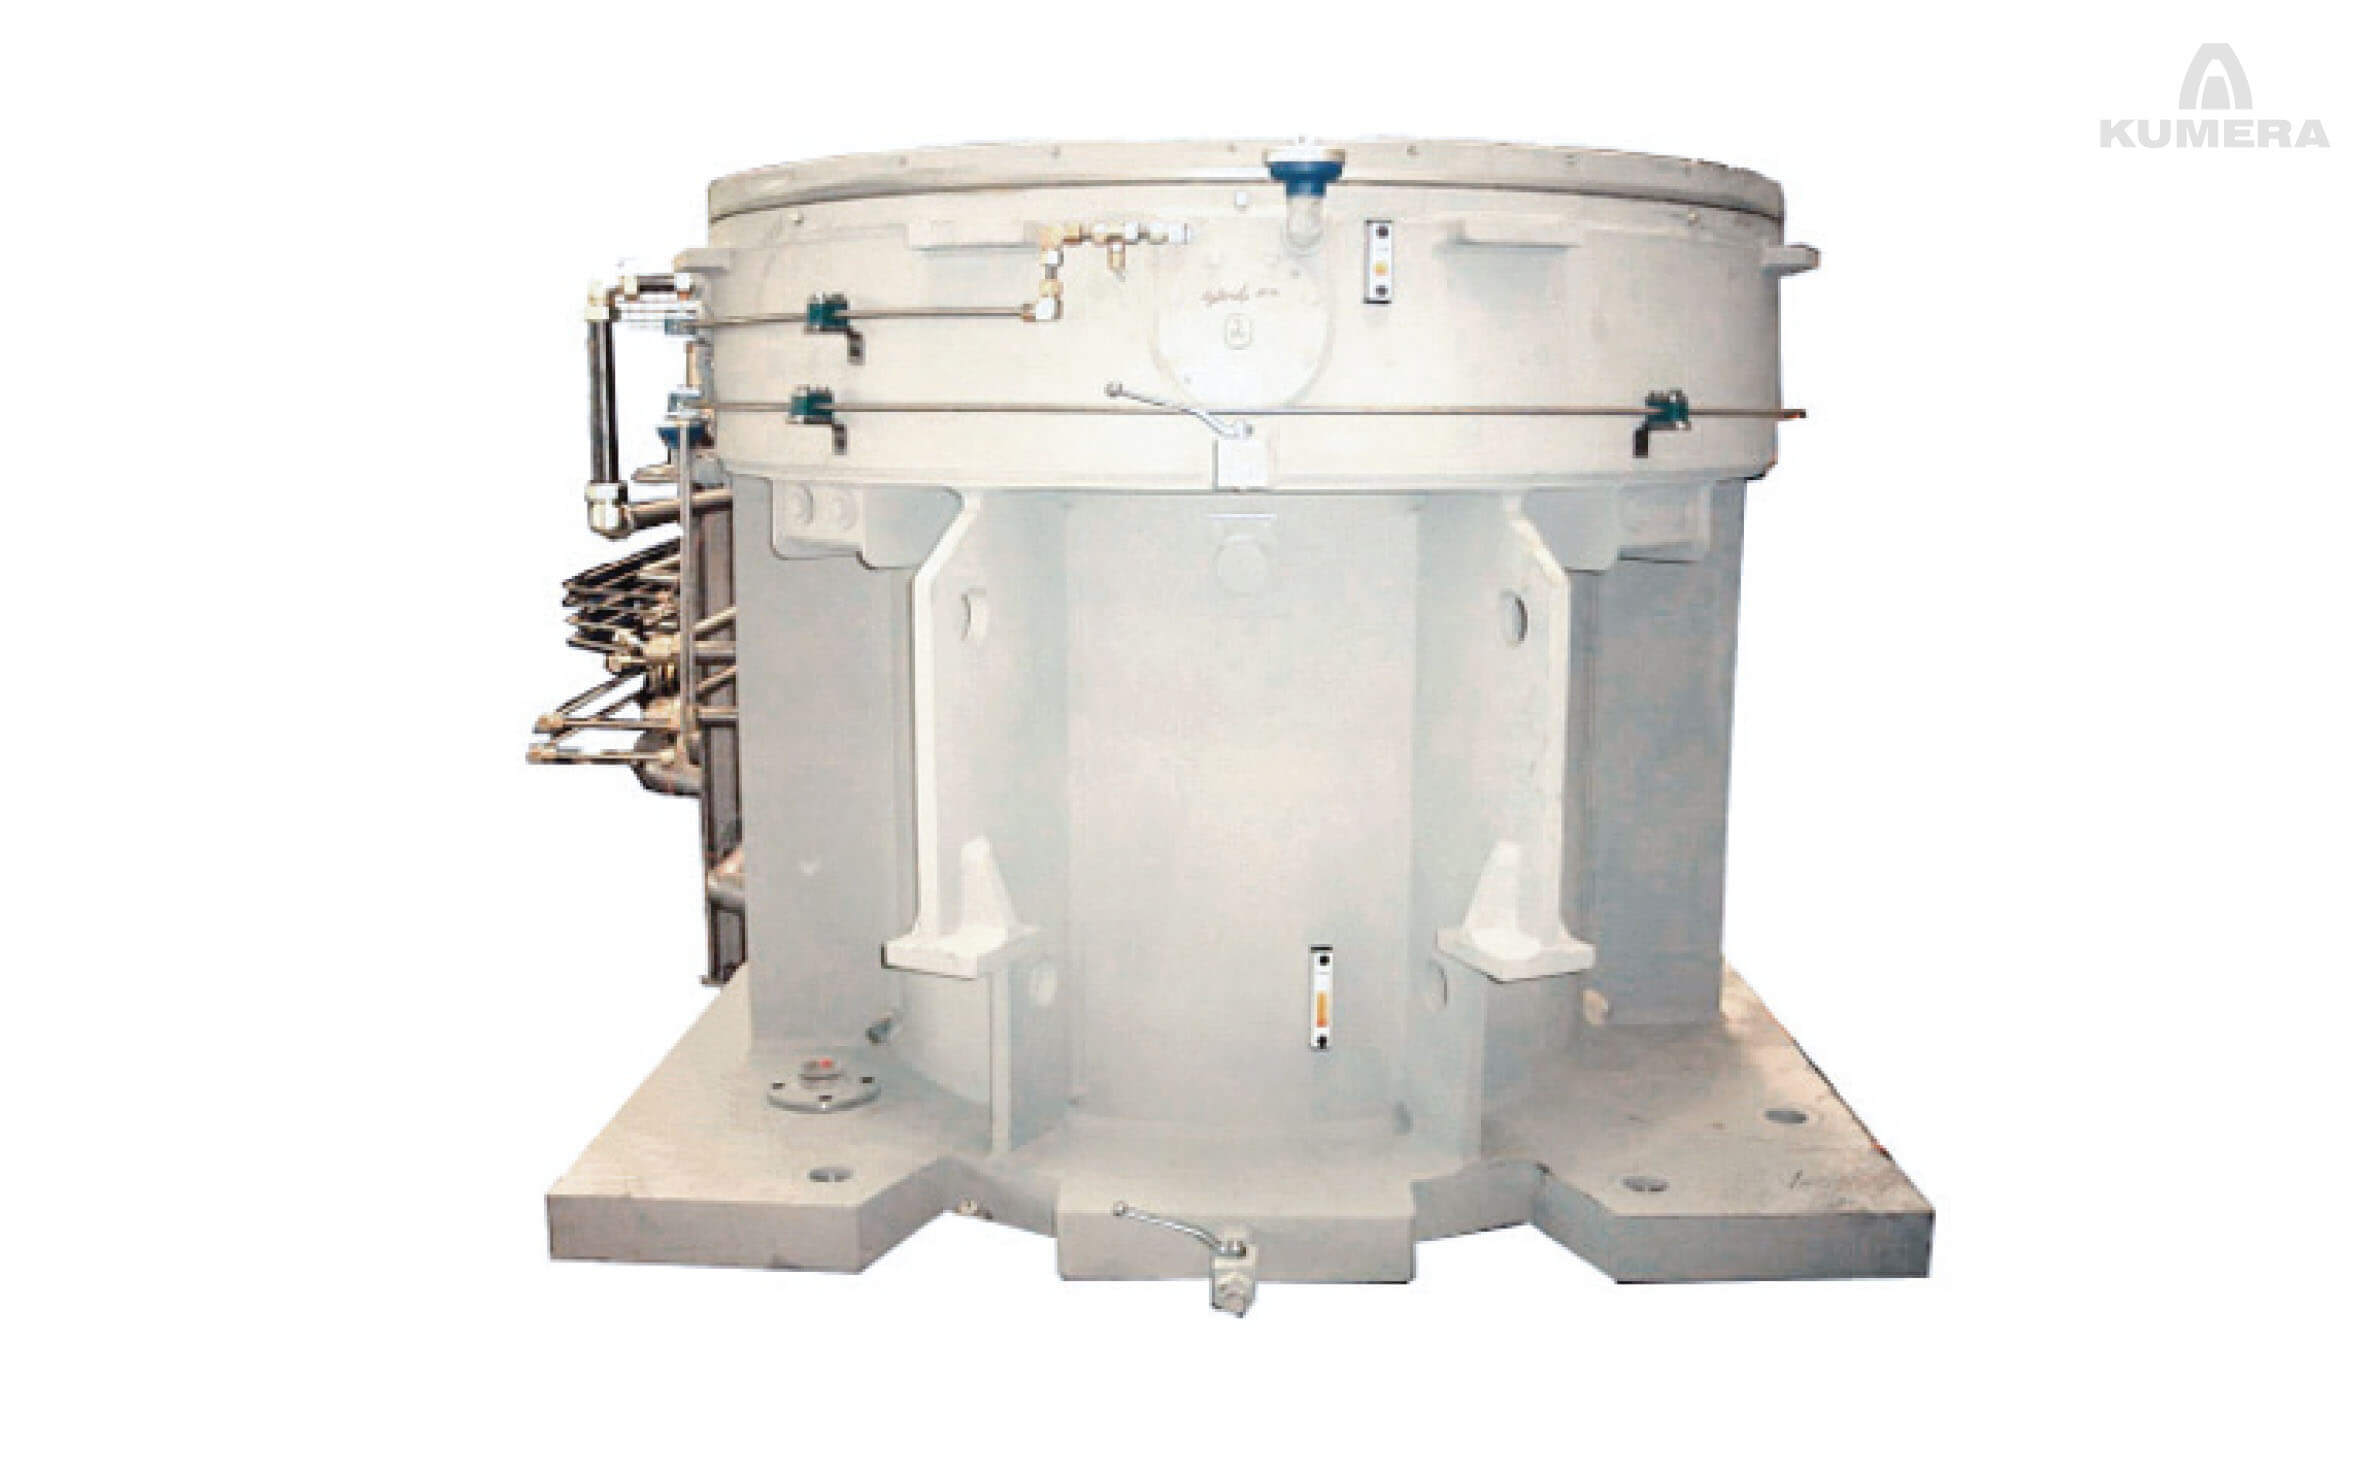 Kumera Custom Built Heavy-Duty Gearboxes for Cement Industry. Kumera Vertical & Horizontal Mill Drives, Girth Gear Drives, Belt Gearboxes, Conveyor Gearboxes, Drive Pinions